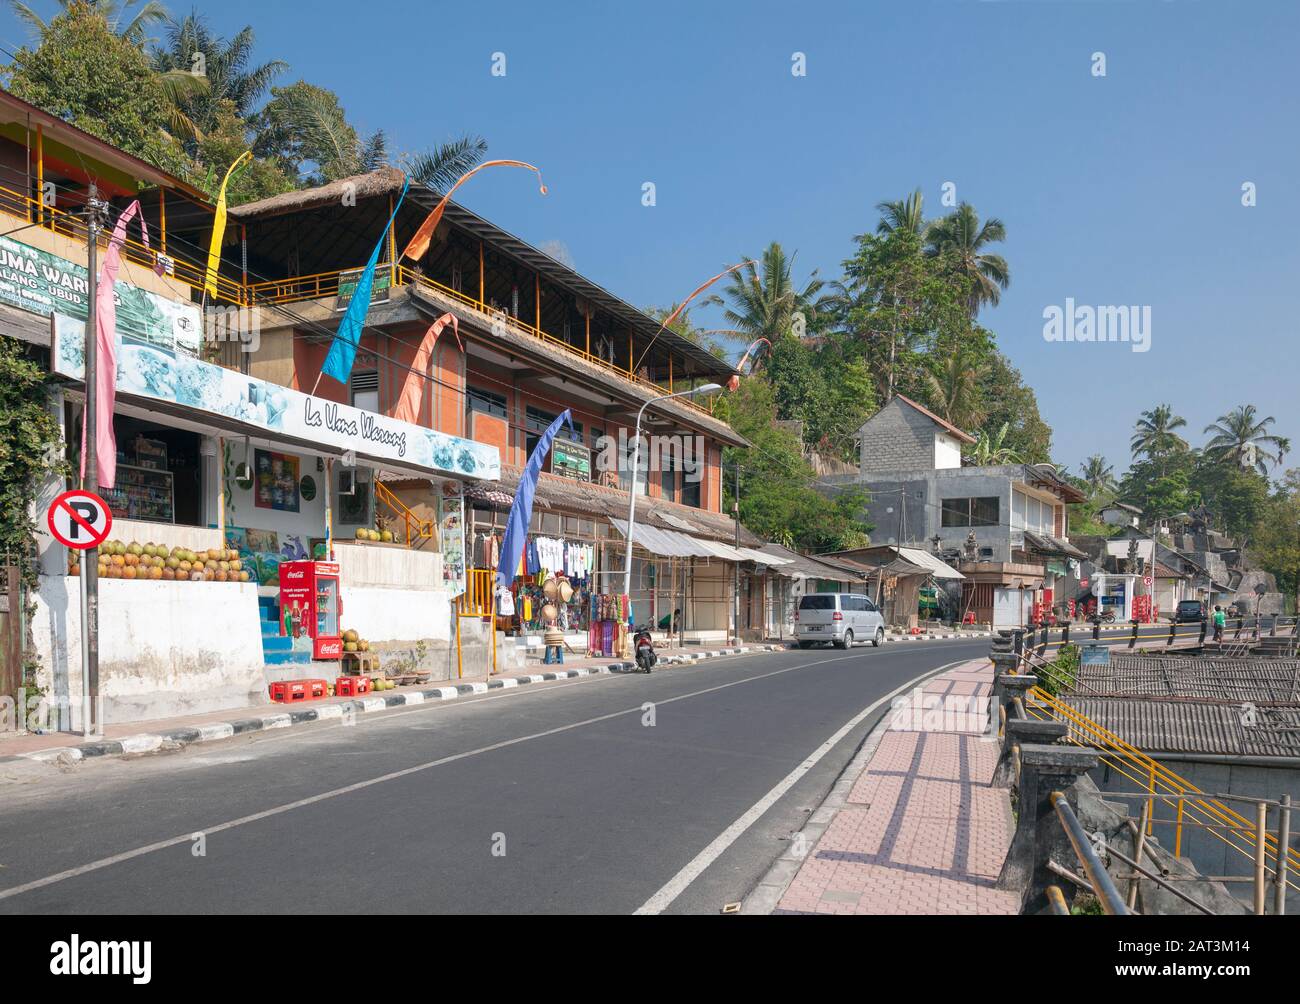 Indonesia, Bali, Gianyar Regency, Tegalalang Rice Terraces, Road with Tourist Shops Stock Photo